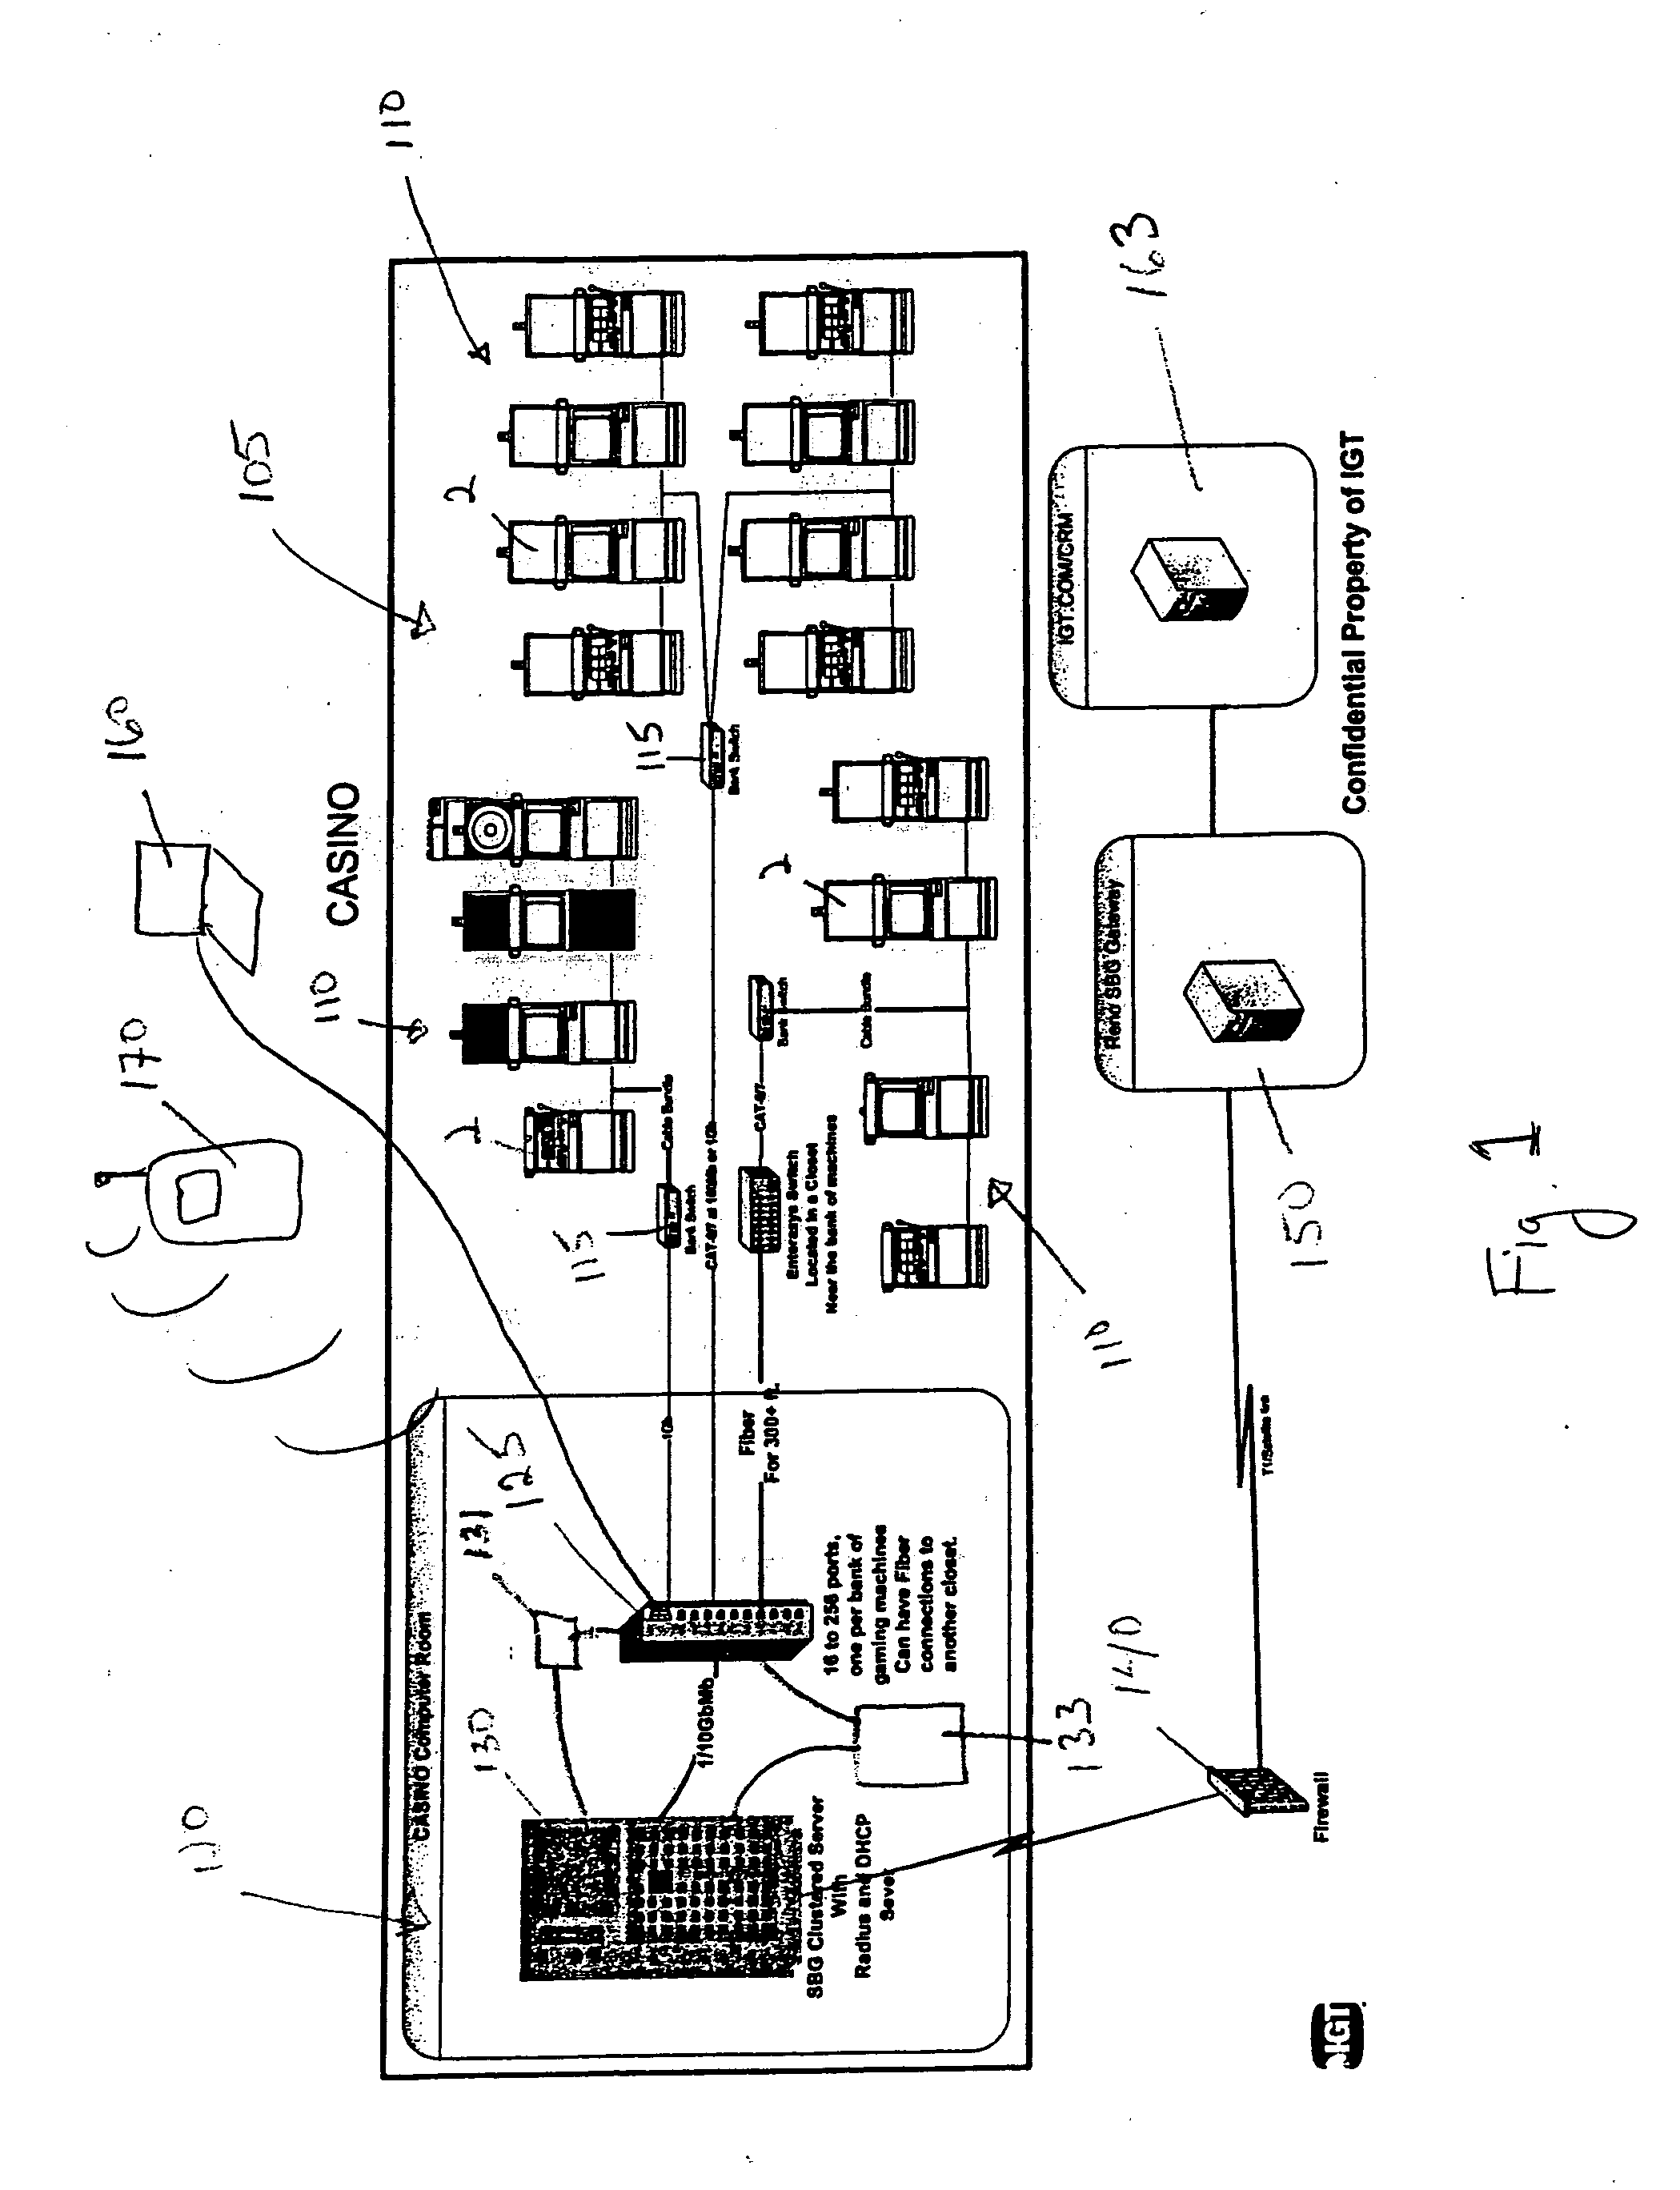 Methods and devices for managing gaming networks